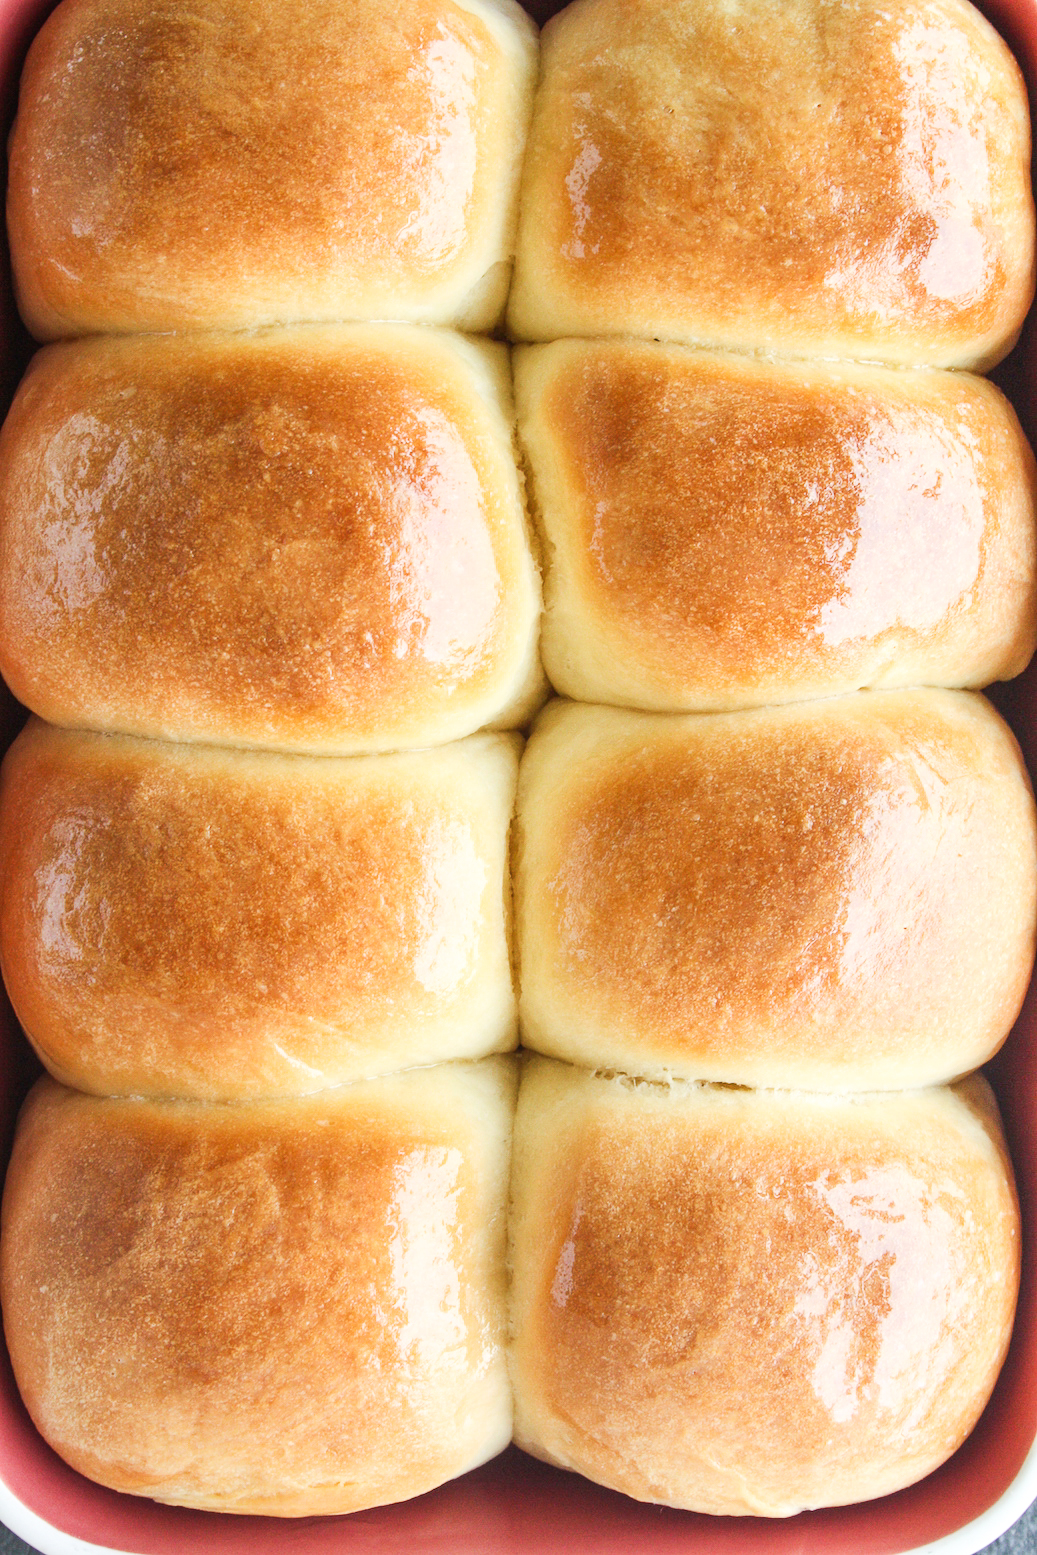 Soft, fluffy homemade rolls without eggs!